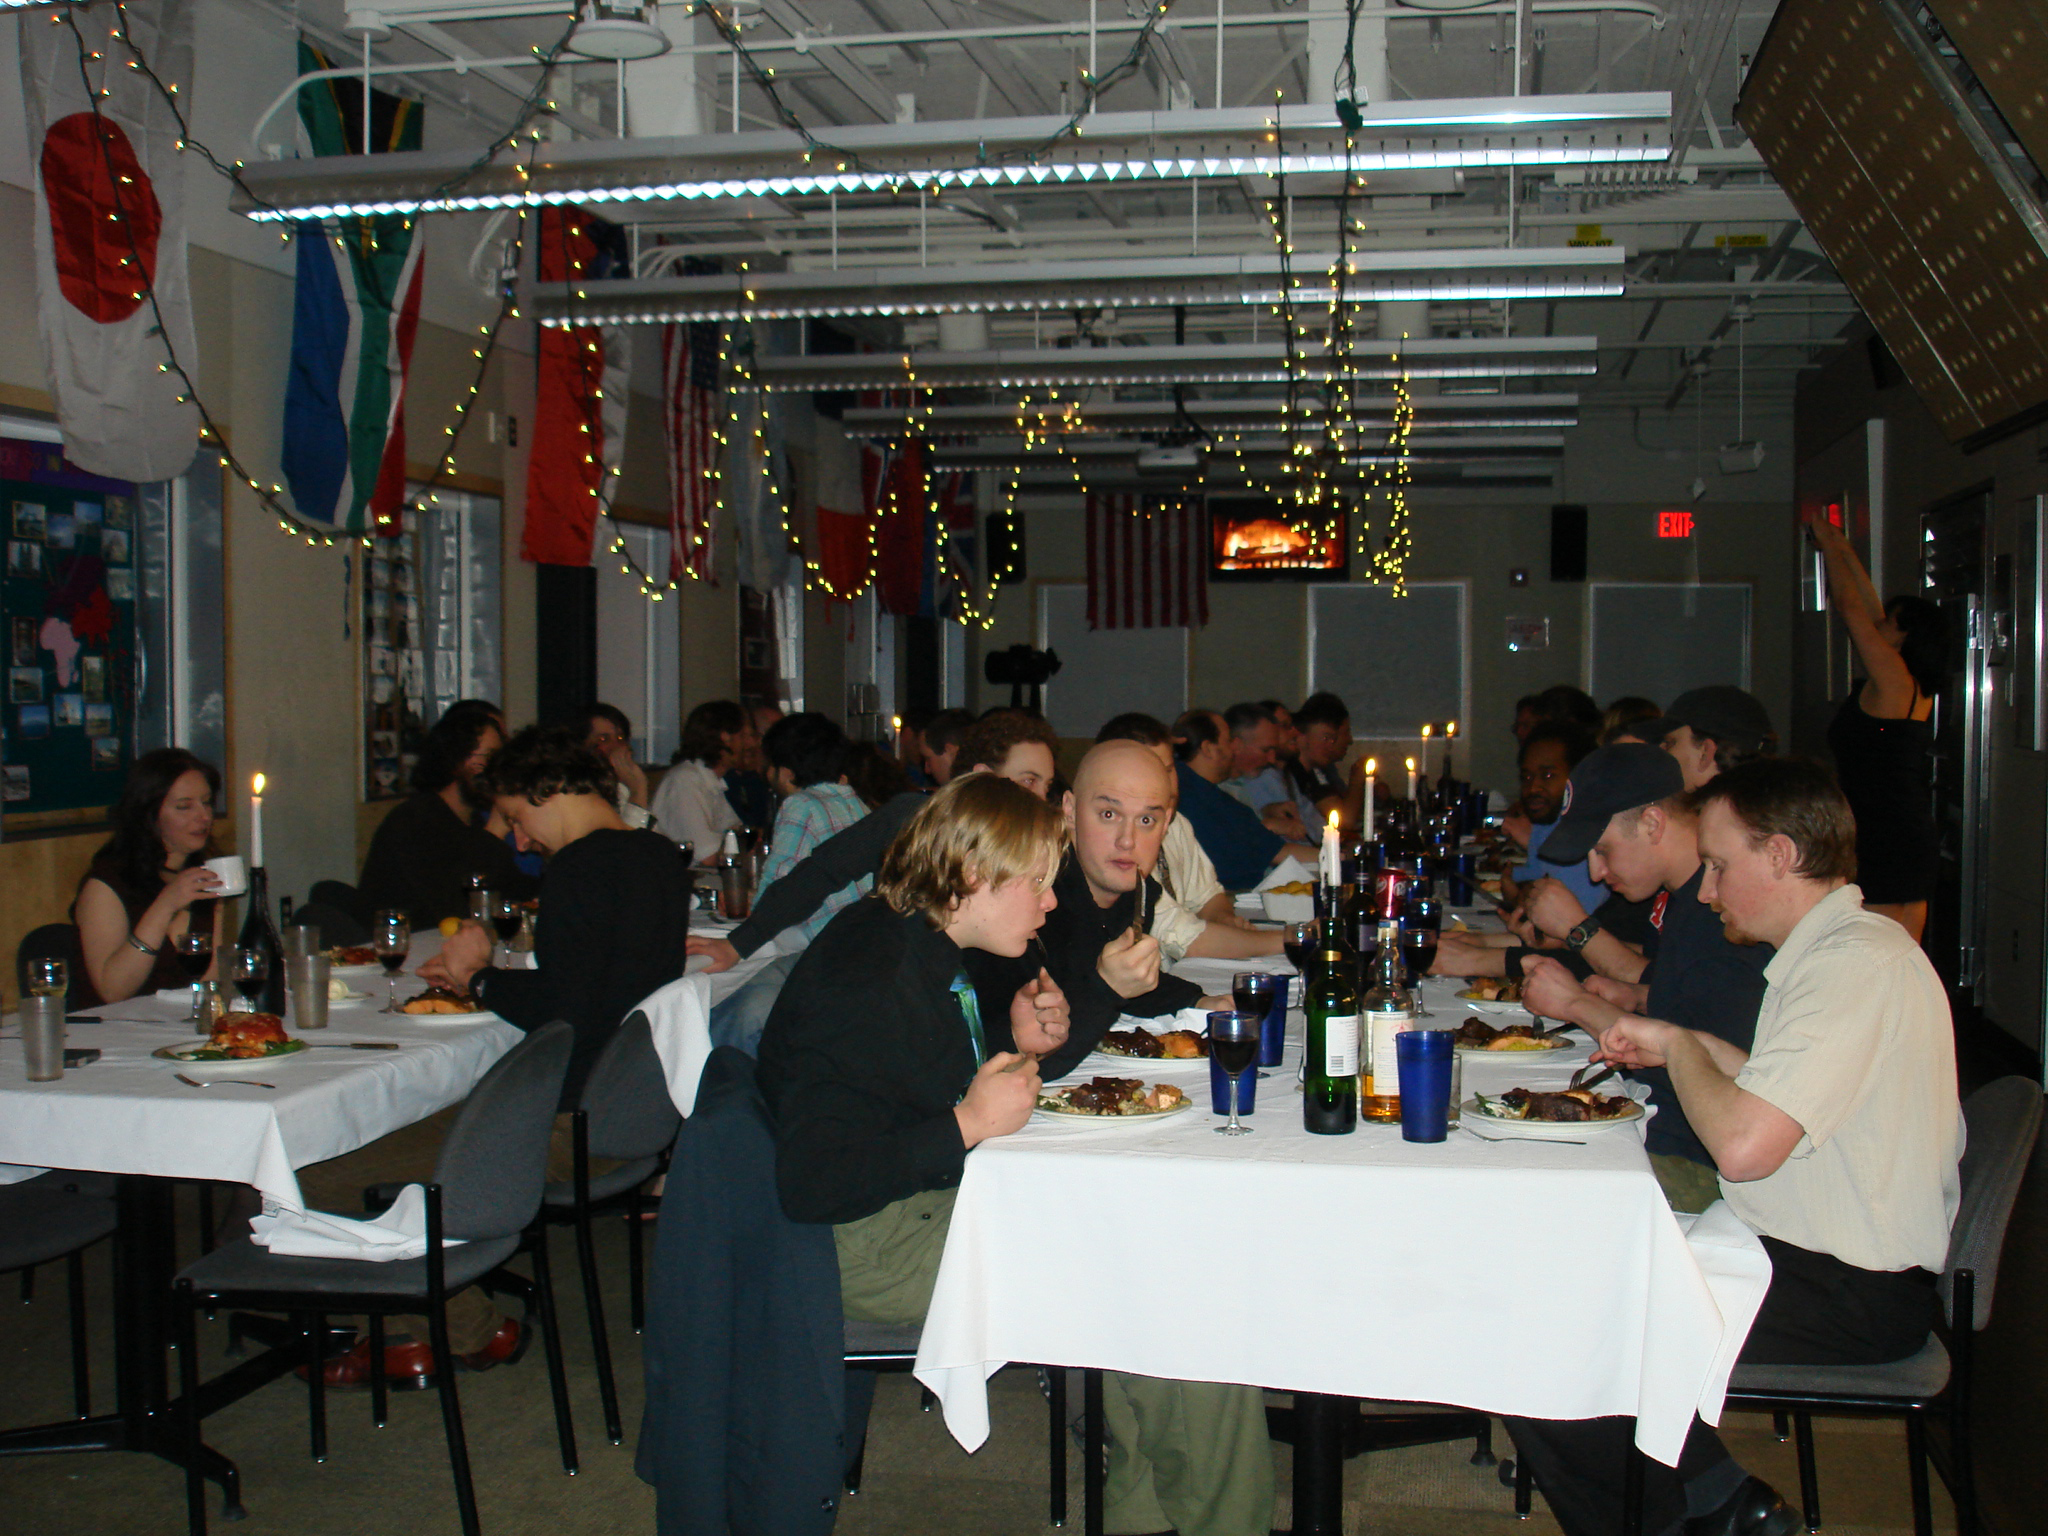 People dining.